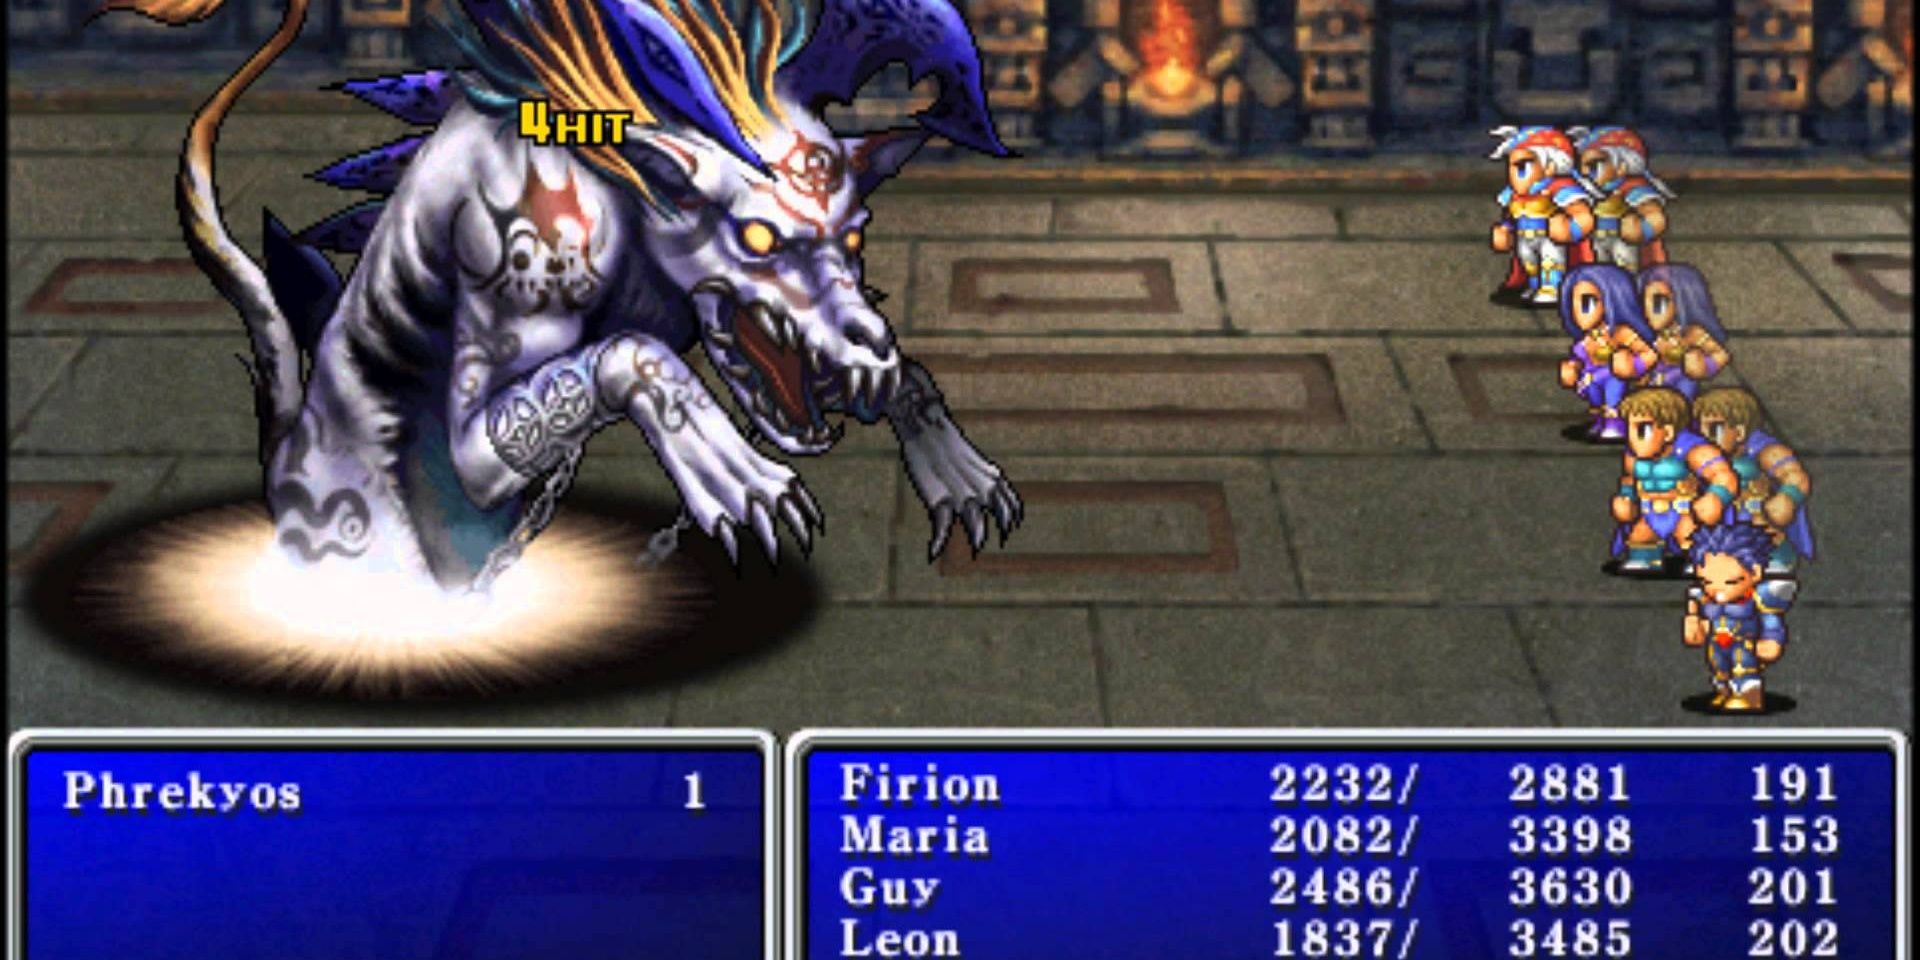 Gameplay from Final Fantasy